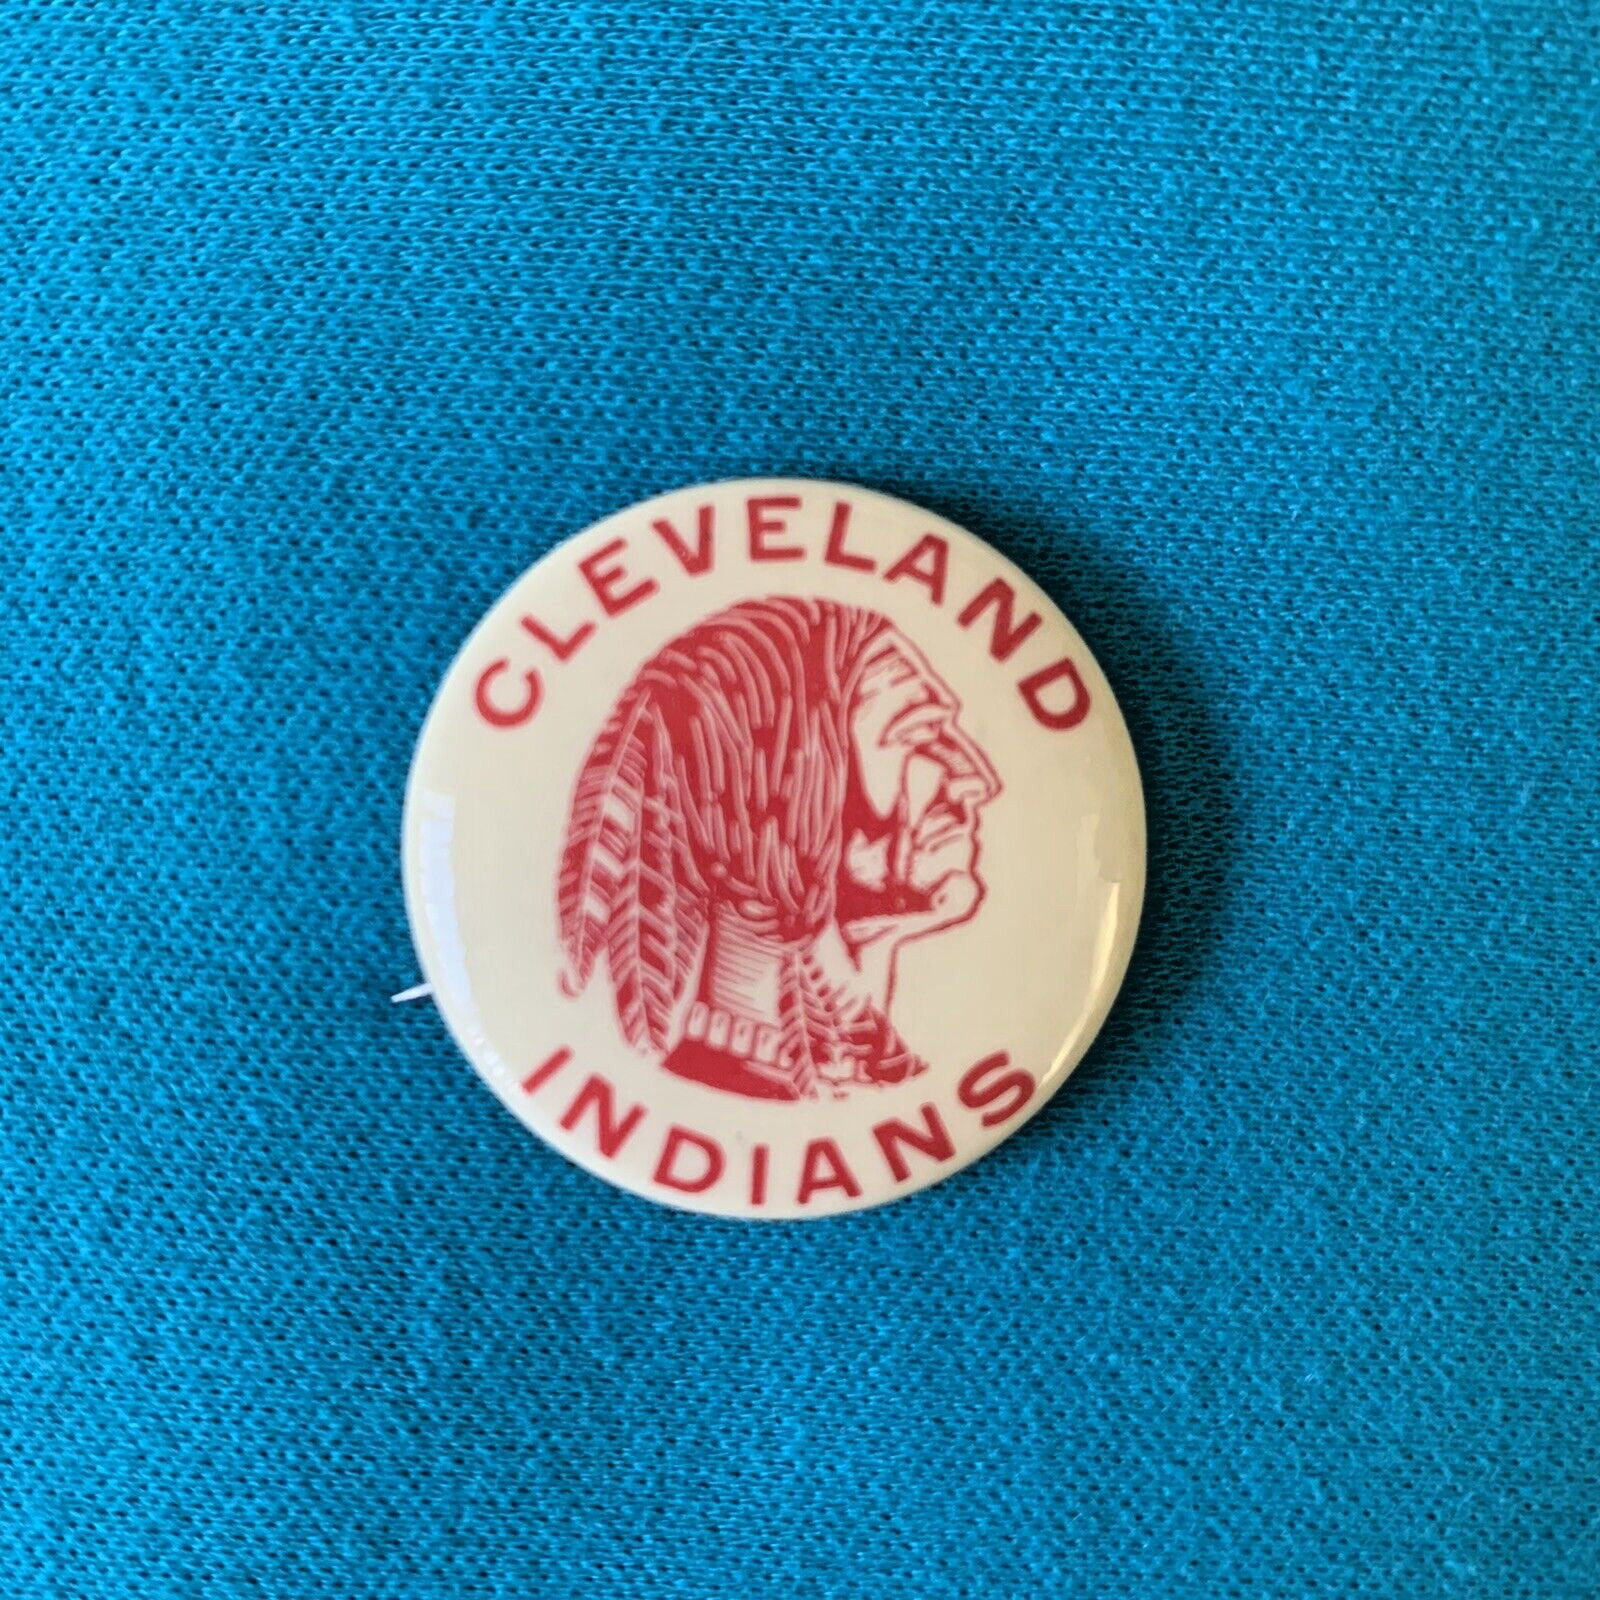 Cleveland Indians / Guardians Pin Pinback Button w/ Chief Wahoo - VINTAGE 1940s?